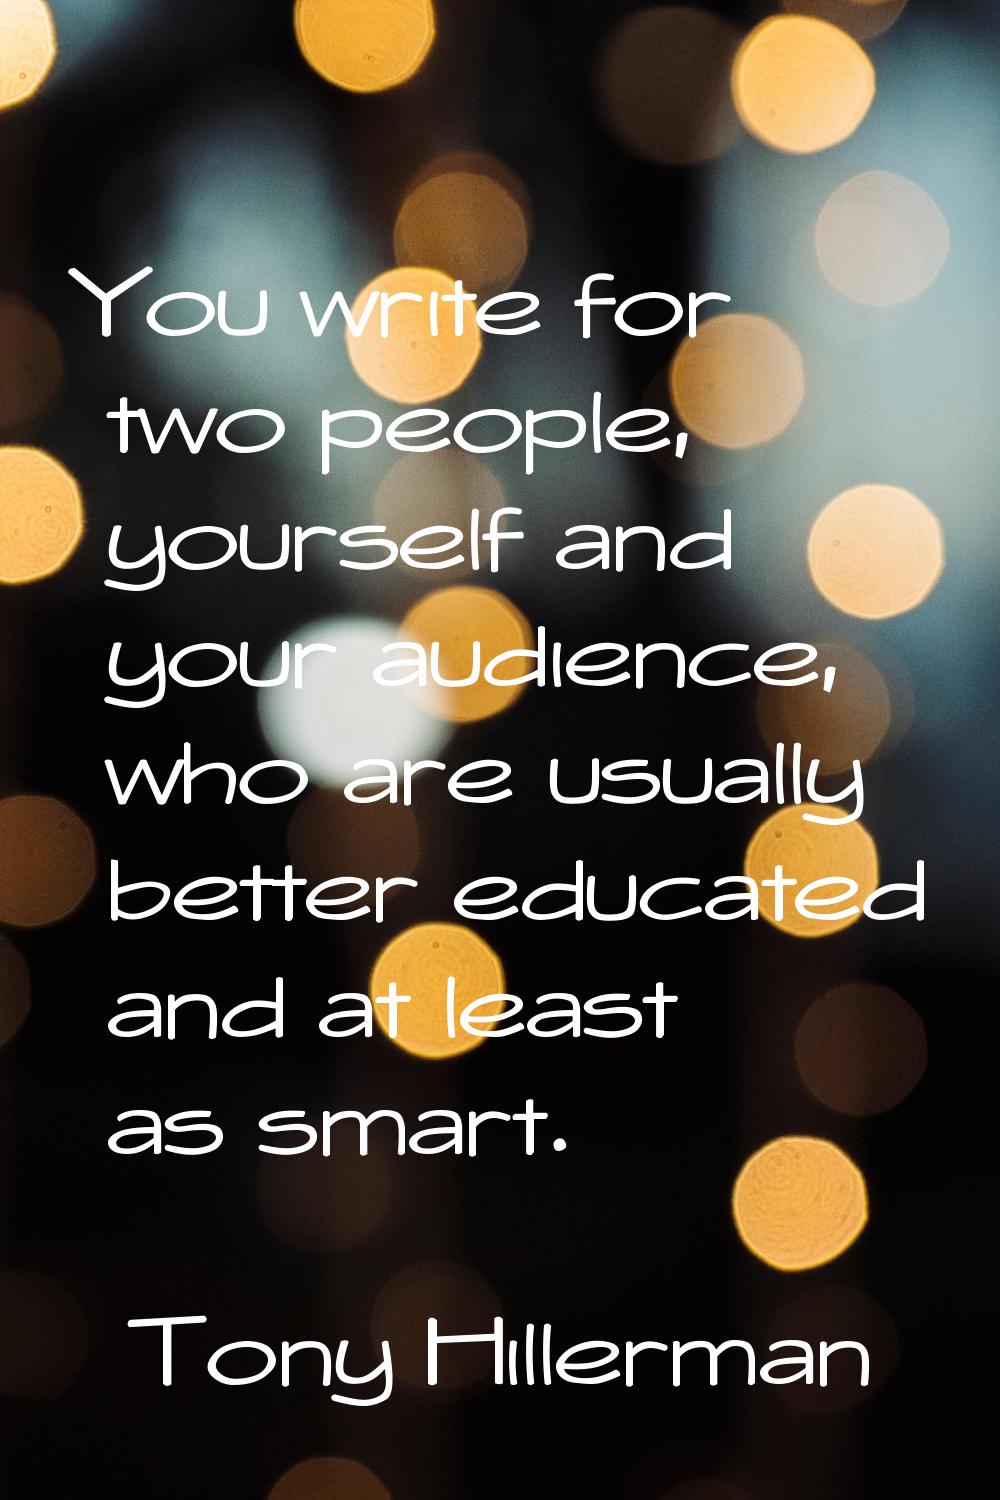 You write for two people, yourself and your audience, who are usually better educated and at least 